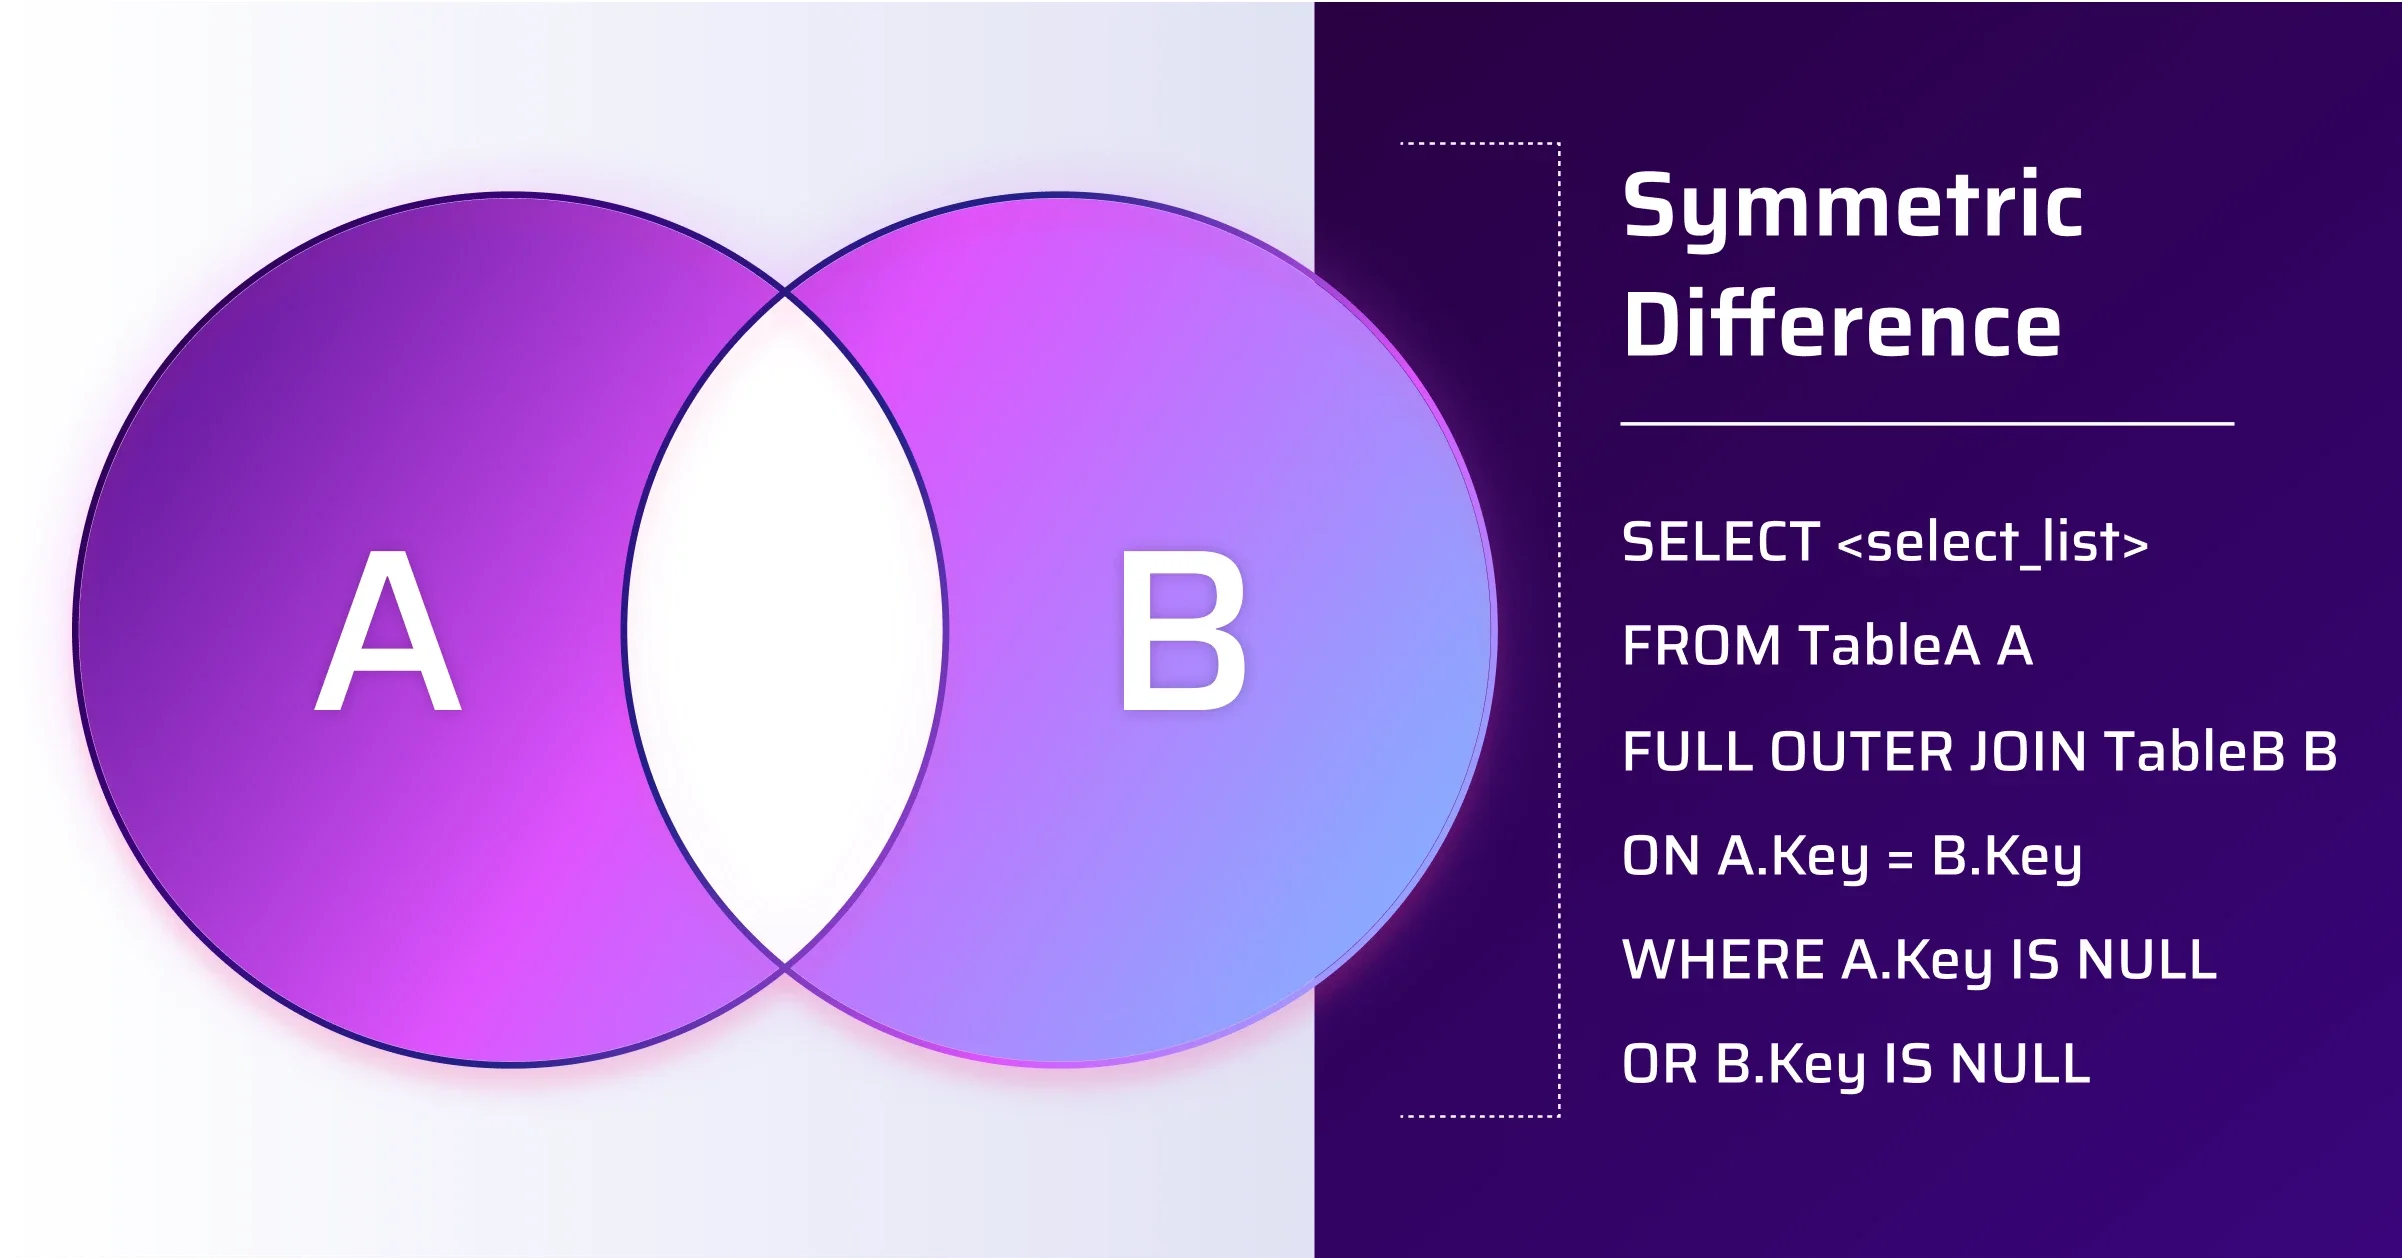 A Venn diagram of the symmetric difference, showing that everything is selected apart from the items in both sets.